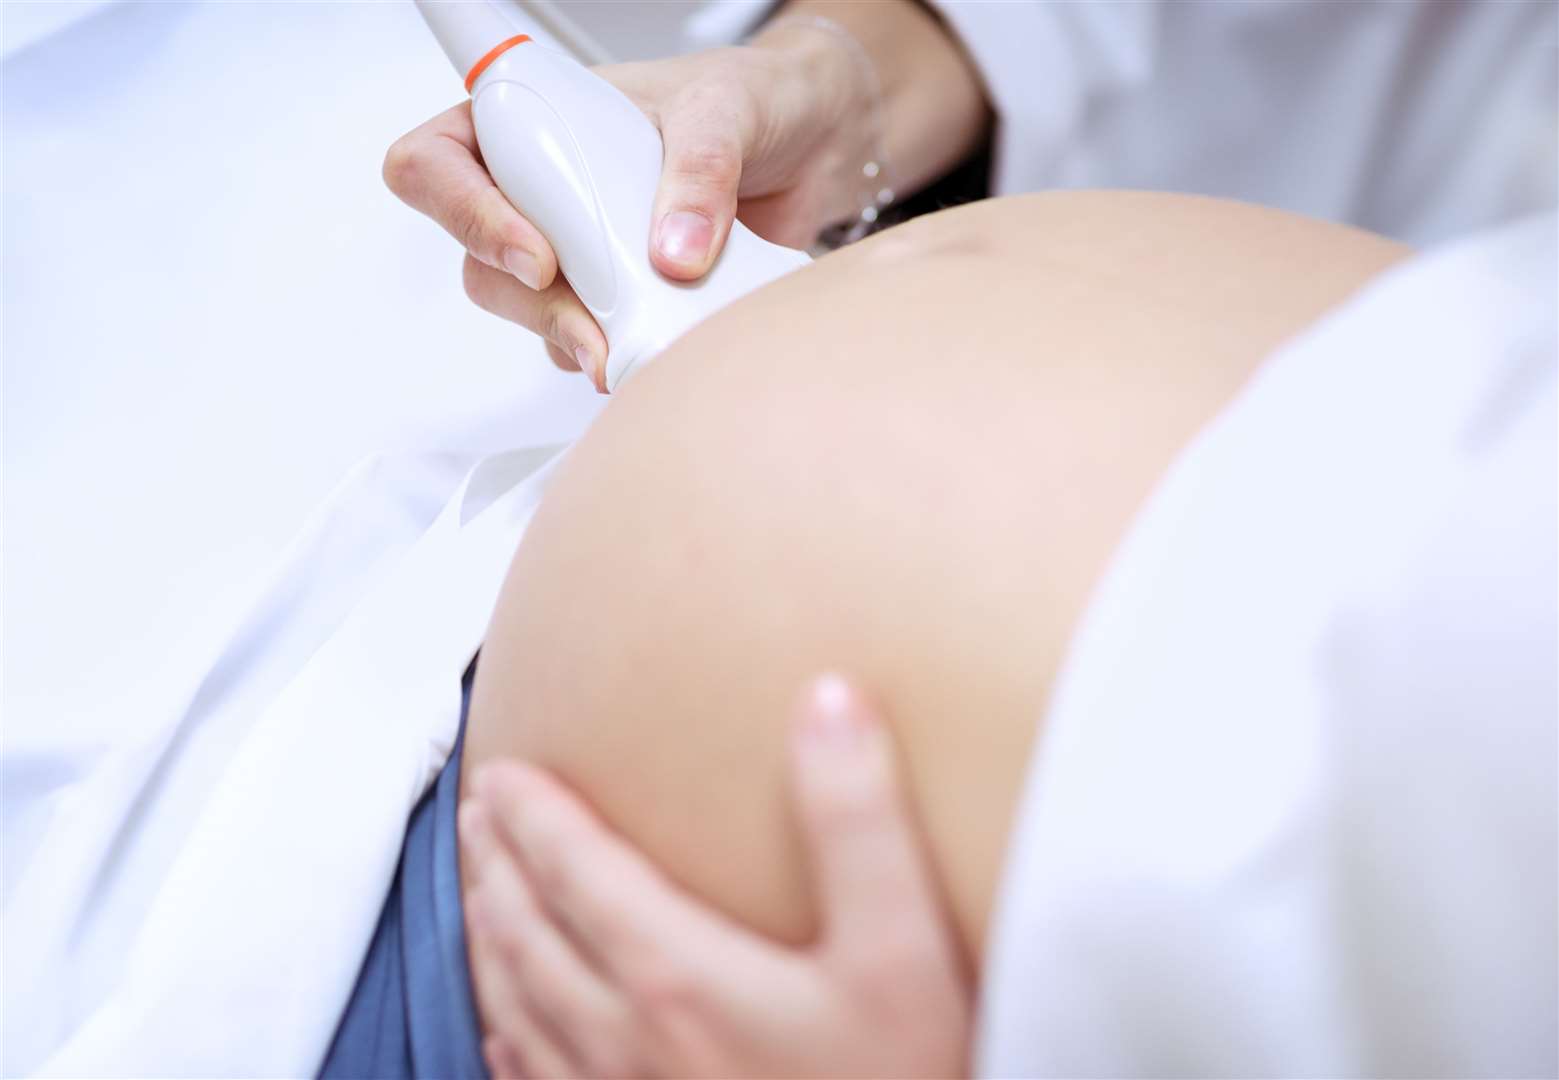 Staff shortages have been affecting antenatal appointments in Kent